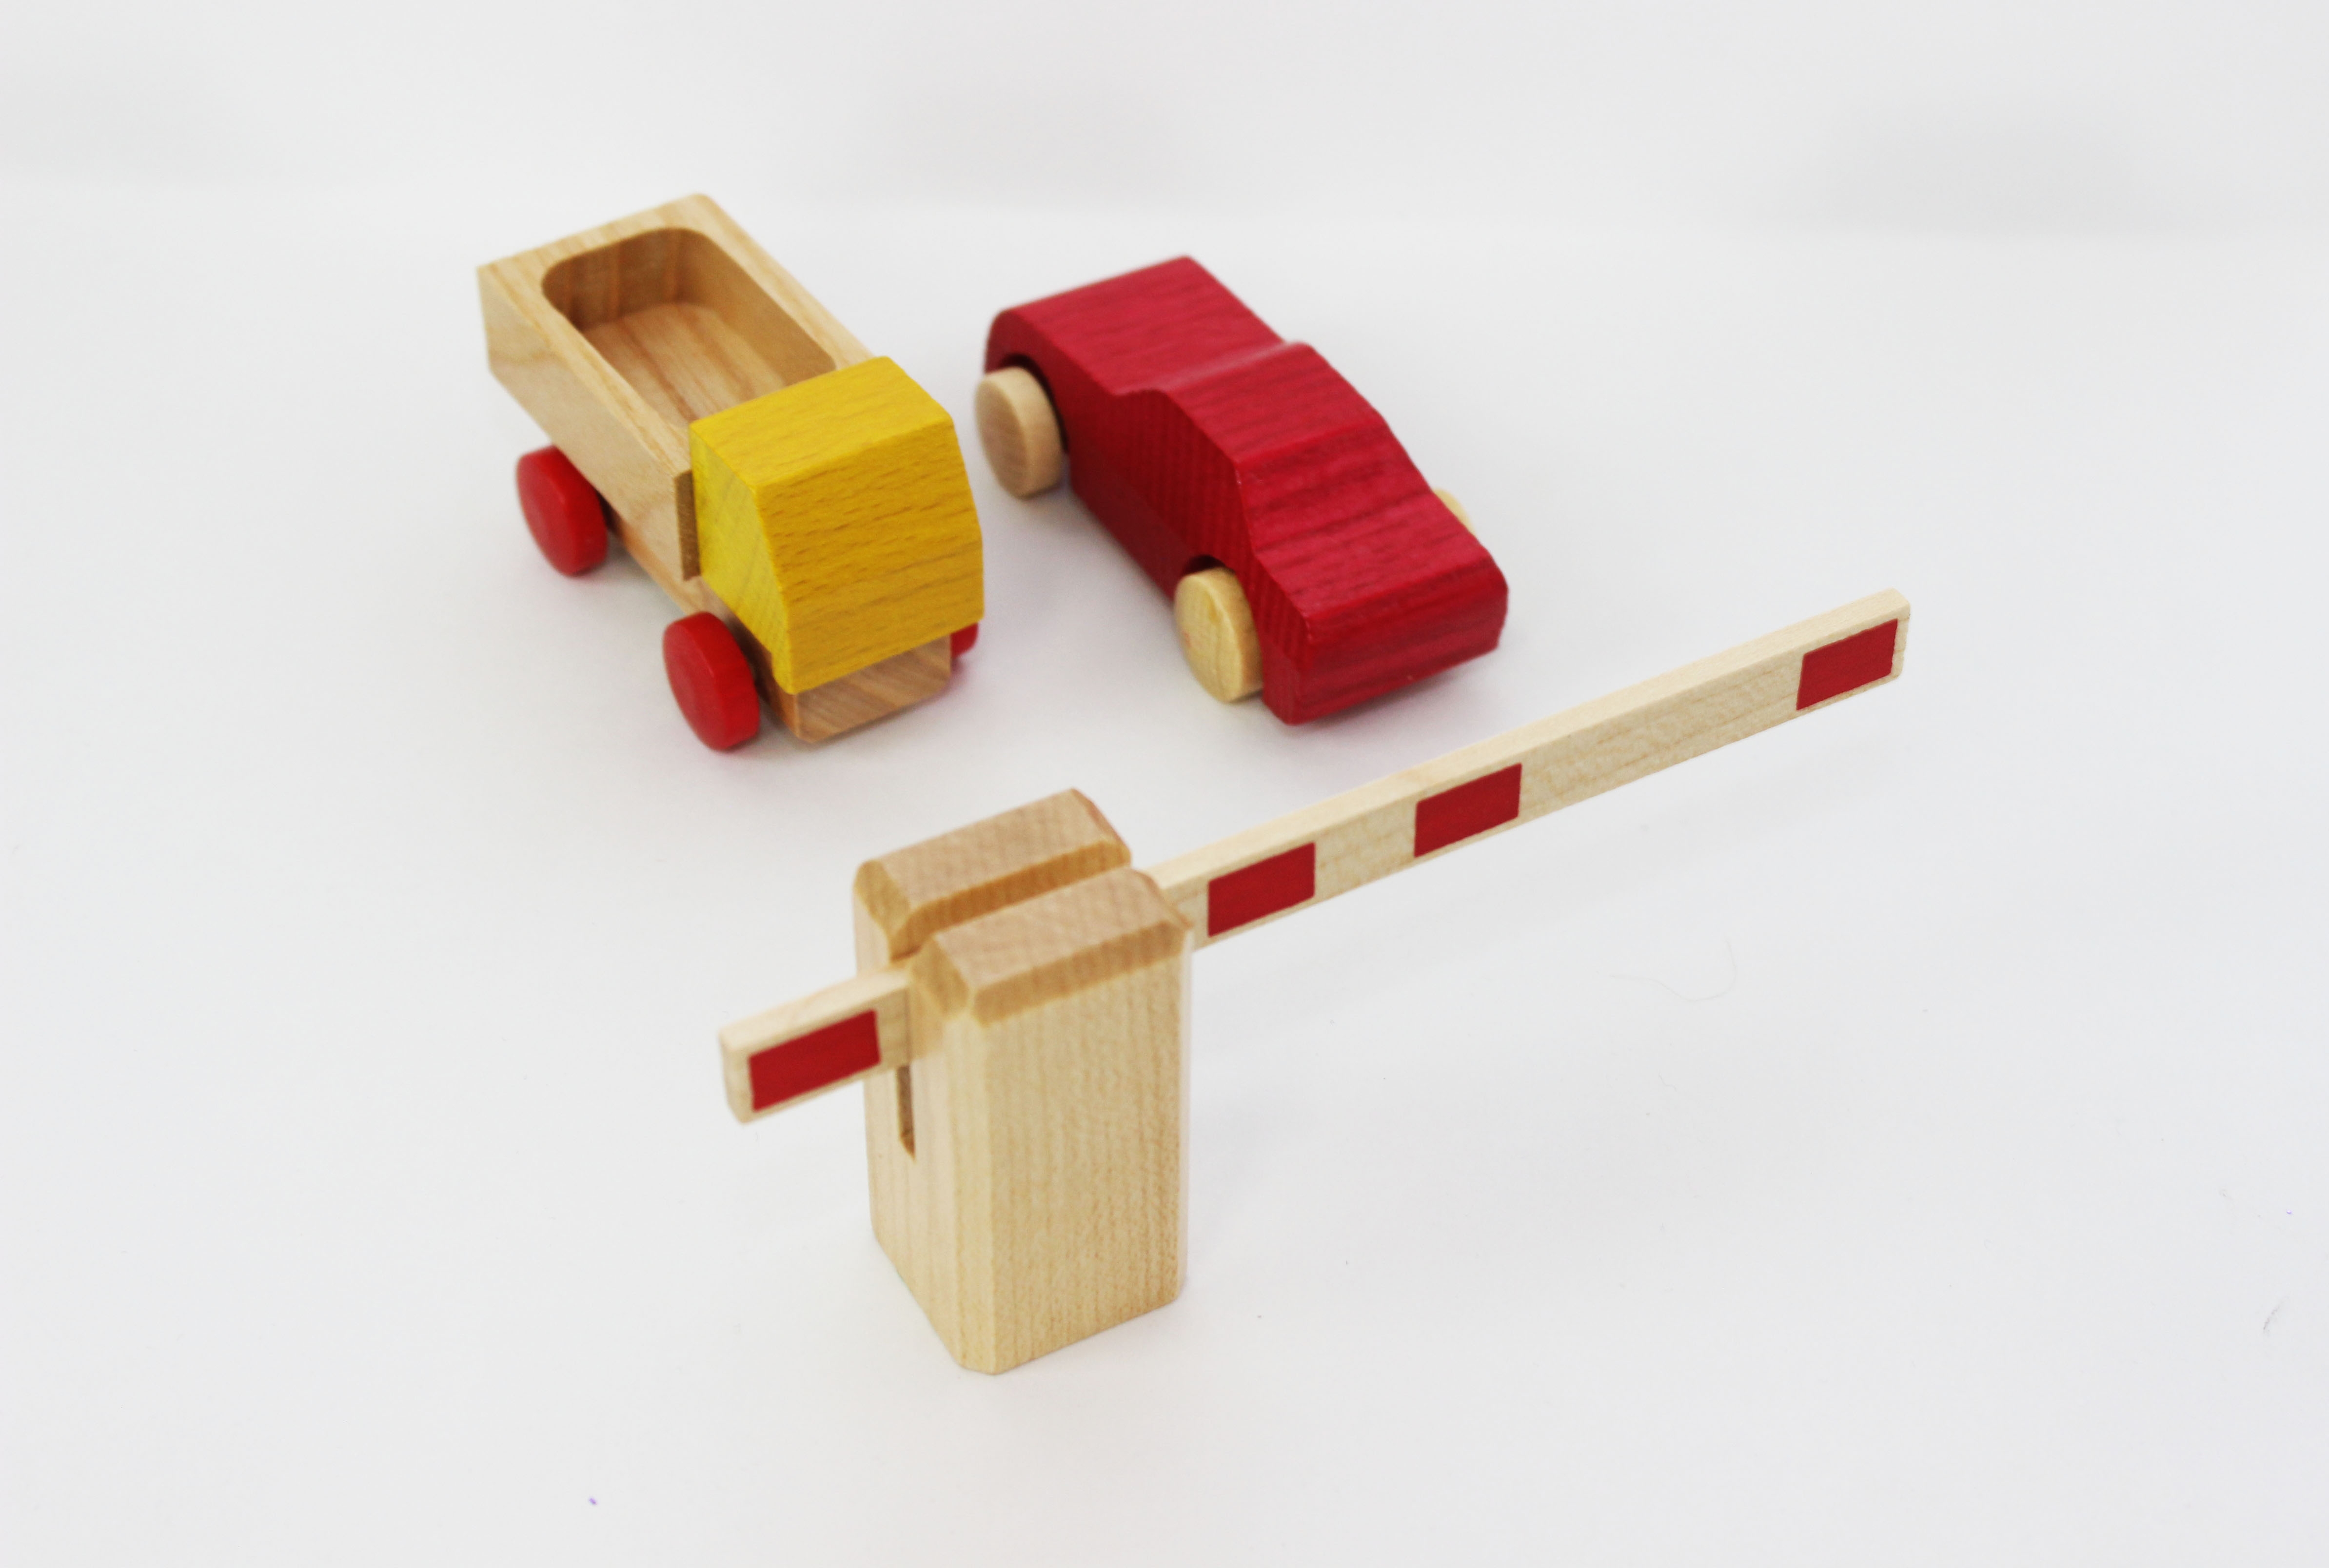 Beck - wooden toys - Passenger car, red, made in Germany